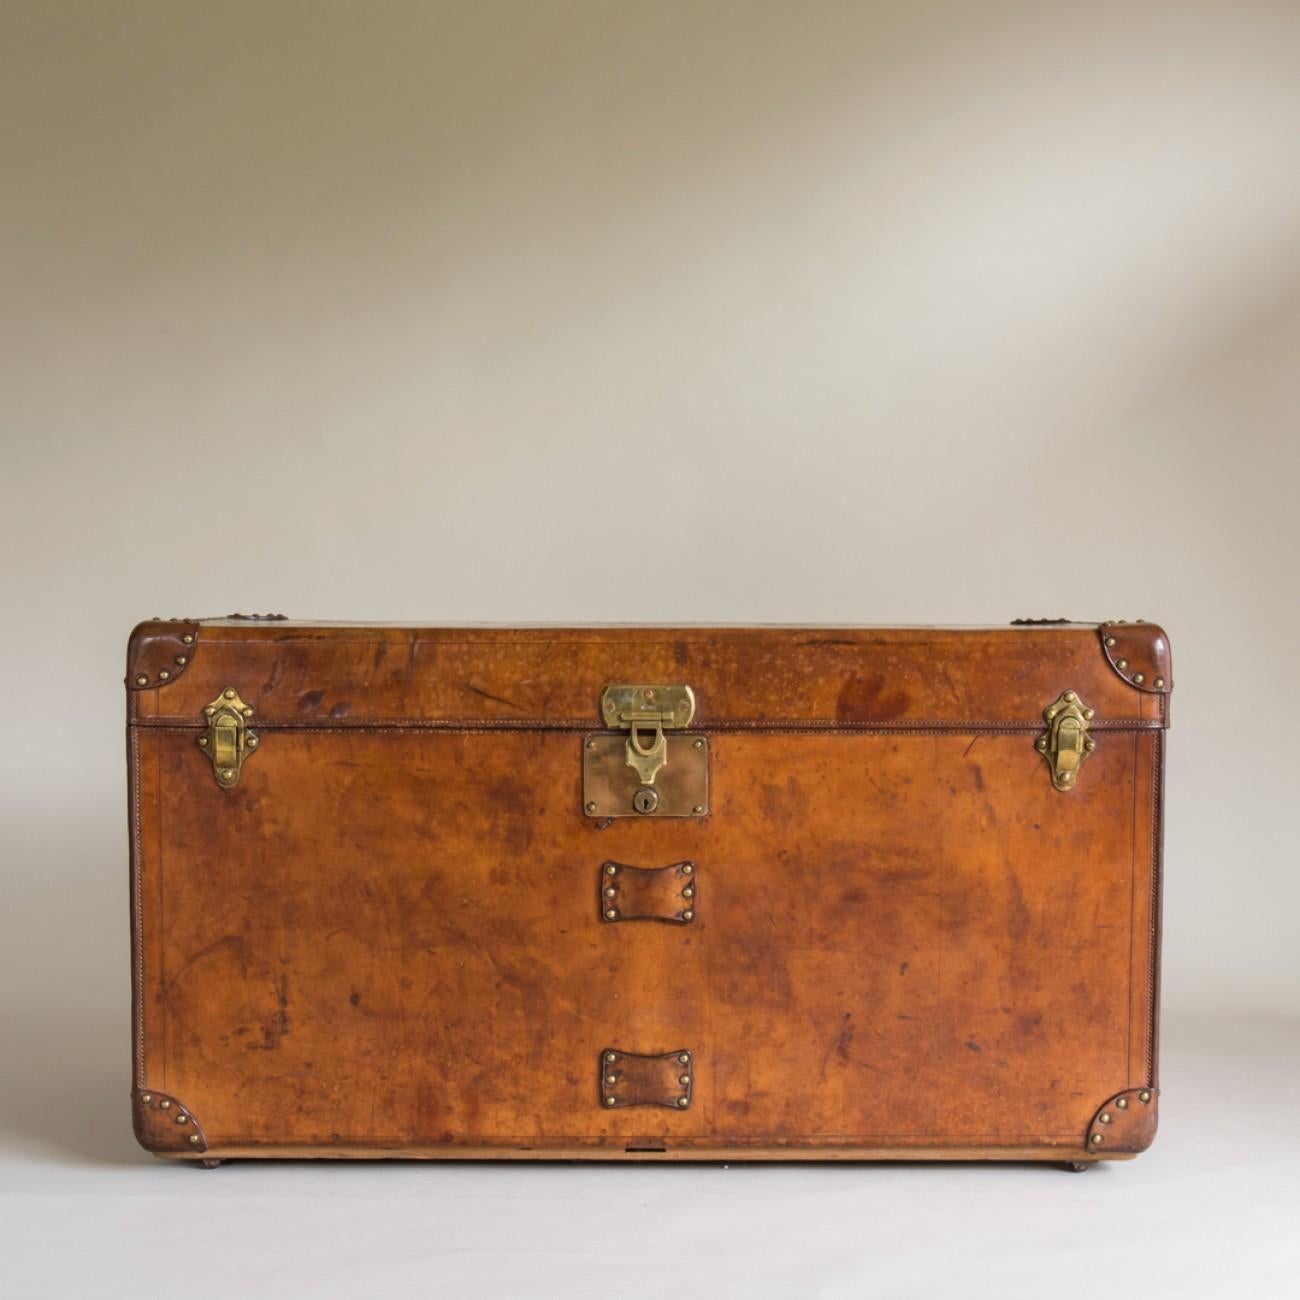 An exceptional bespoke leather Goyard steamer trunk with original interior. Circa 1910. The lock plate for this trunk has been changed at some point in it's history.

In 1853 François Goyard took over from Moral - a trunk maker who was trunk maker